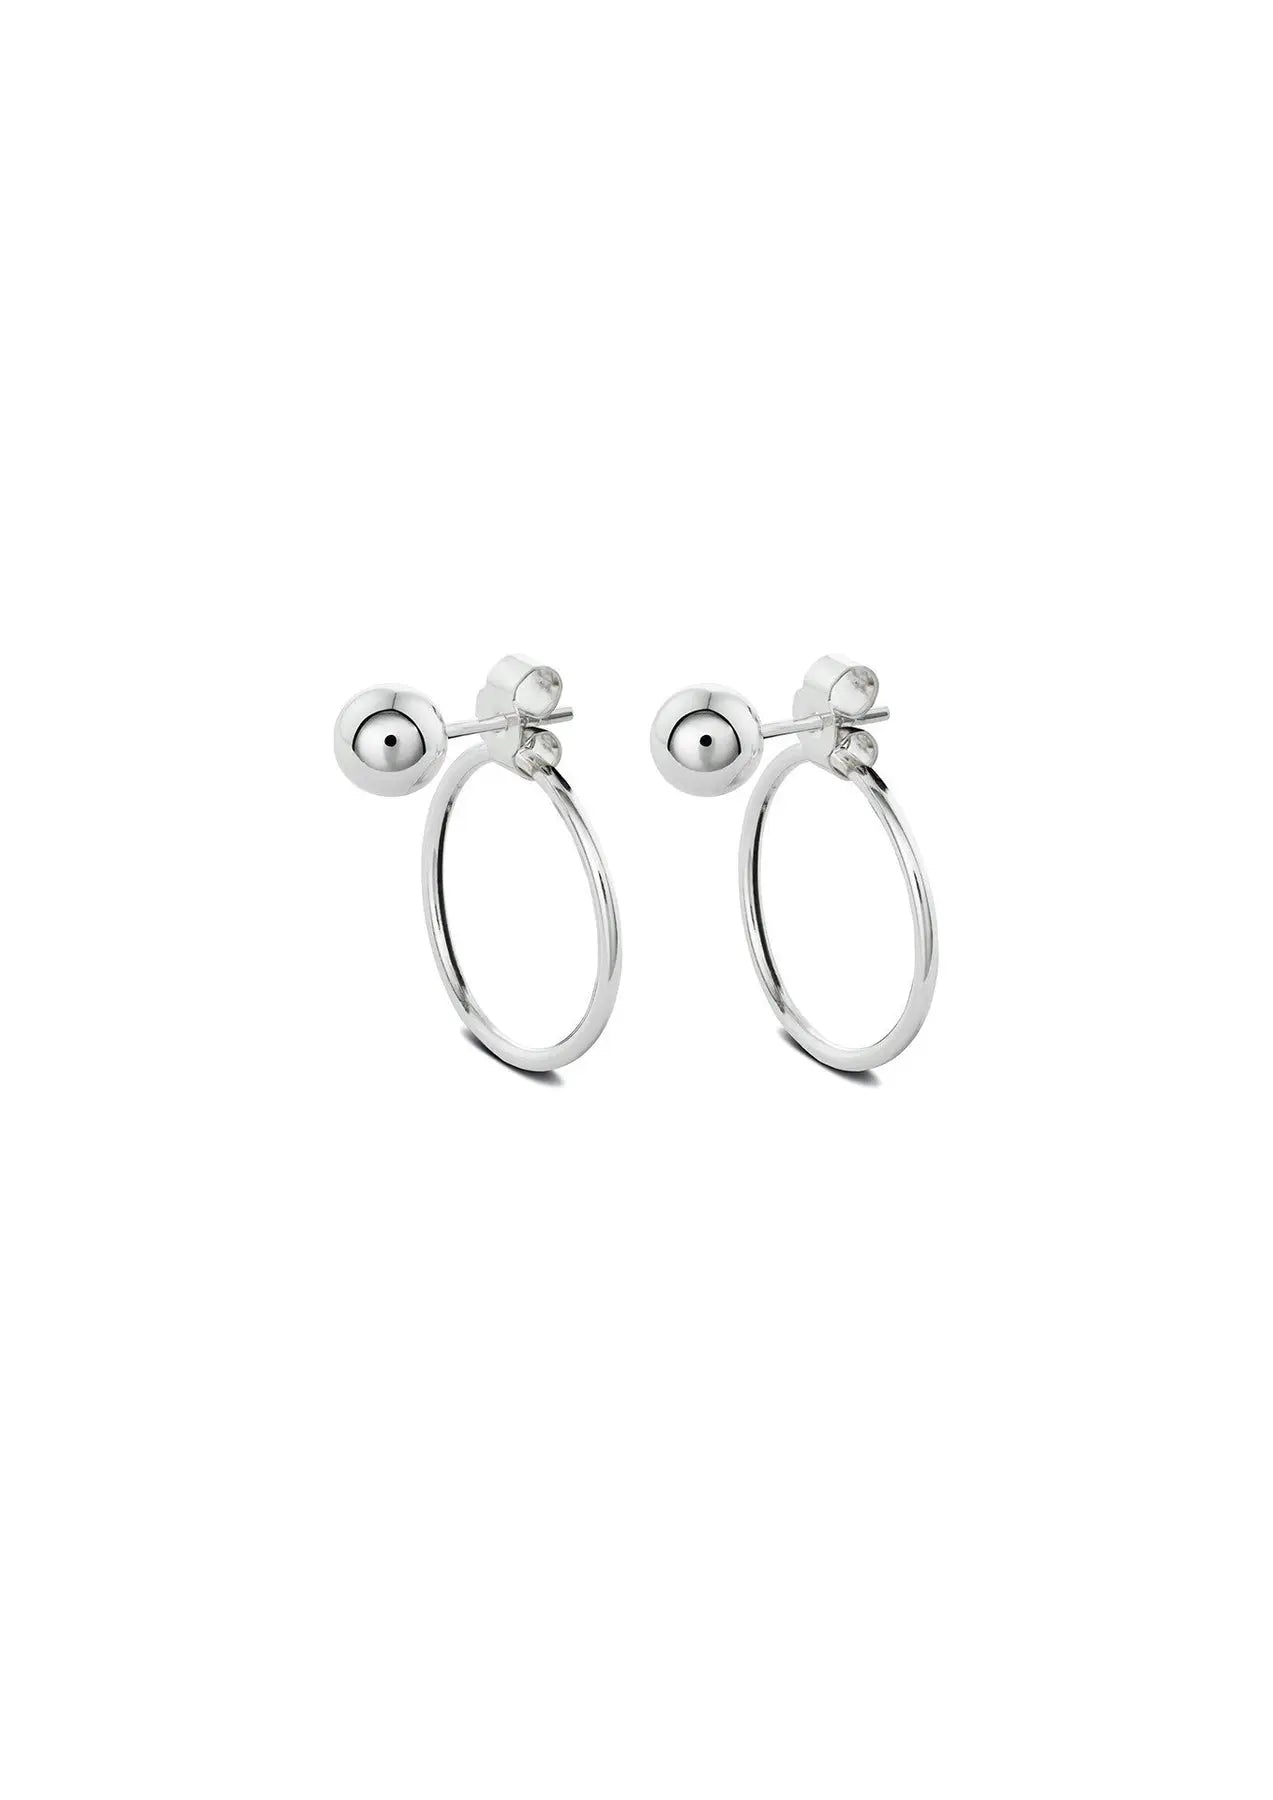 Sterling silver Chord Earrings featuring a front ball and circular design, with push-back clasps. Handmade sustainably, 1.2mm band, 18.2mm circle diameter, 3mm bead. Warranty included.